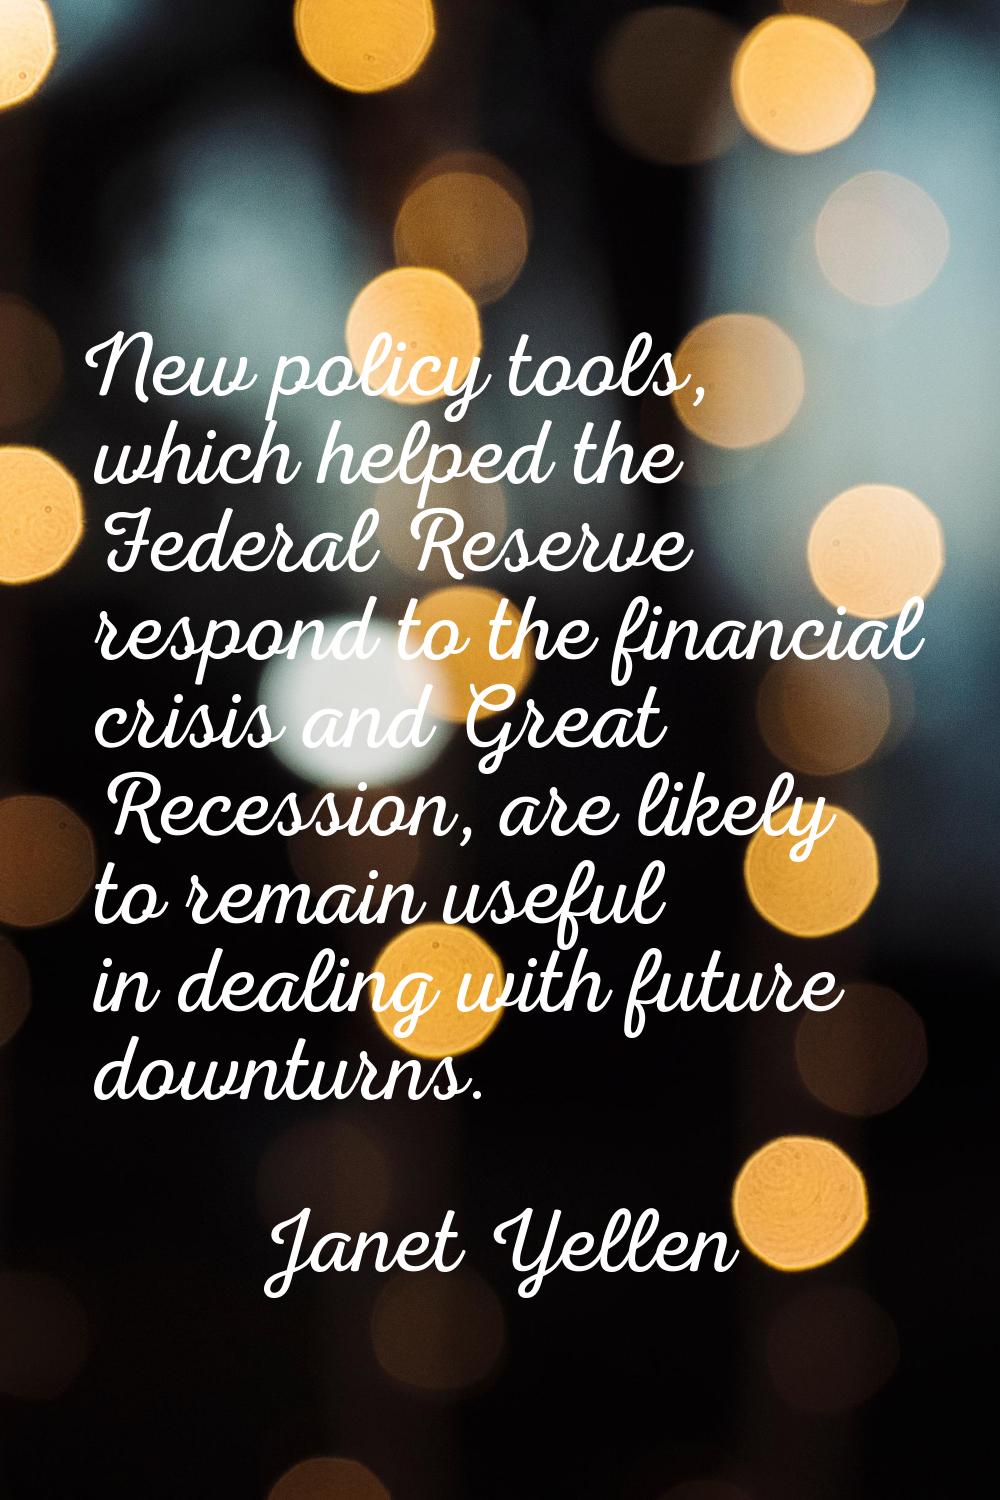 New policy tools, which helped the Federal Reserve respond to the financial crisis and Great Recess